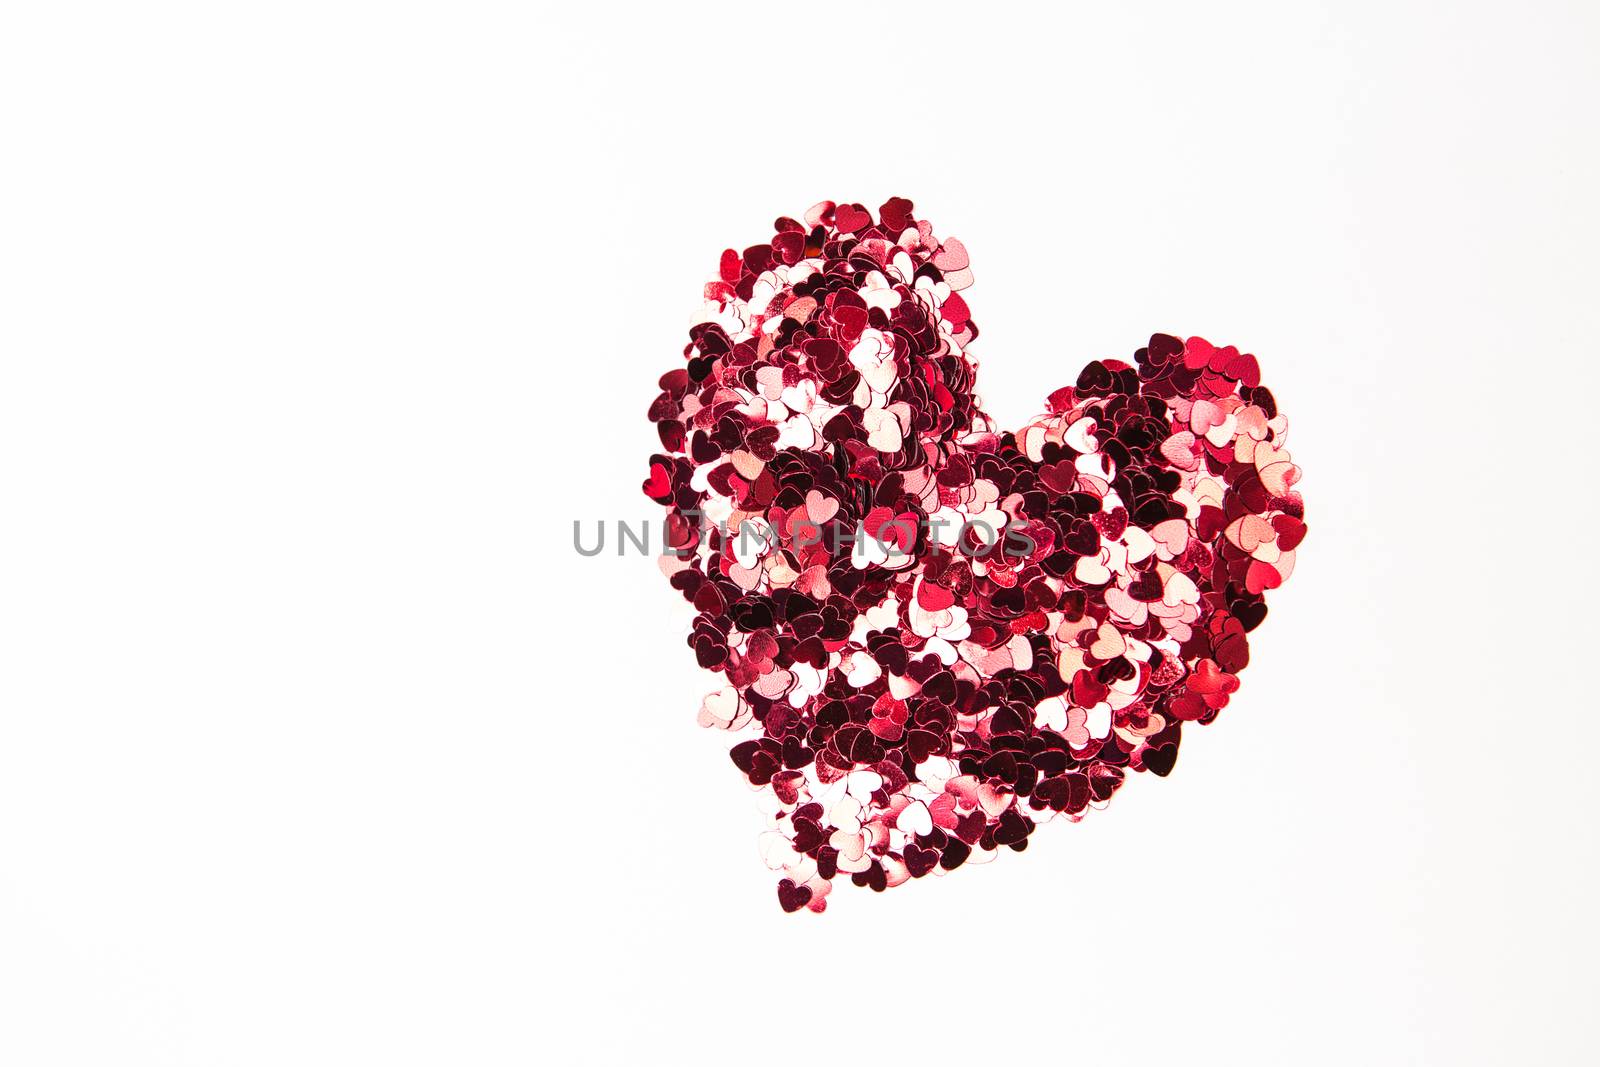 Pink and red confetti in heart shape by Wavebreakmedia